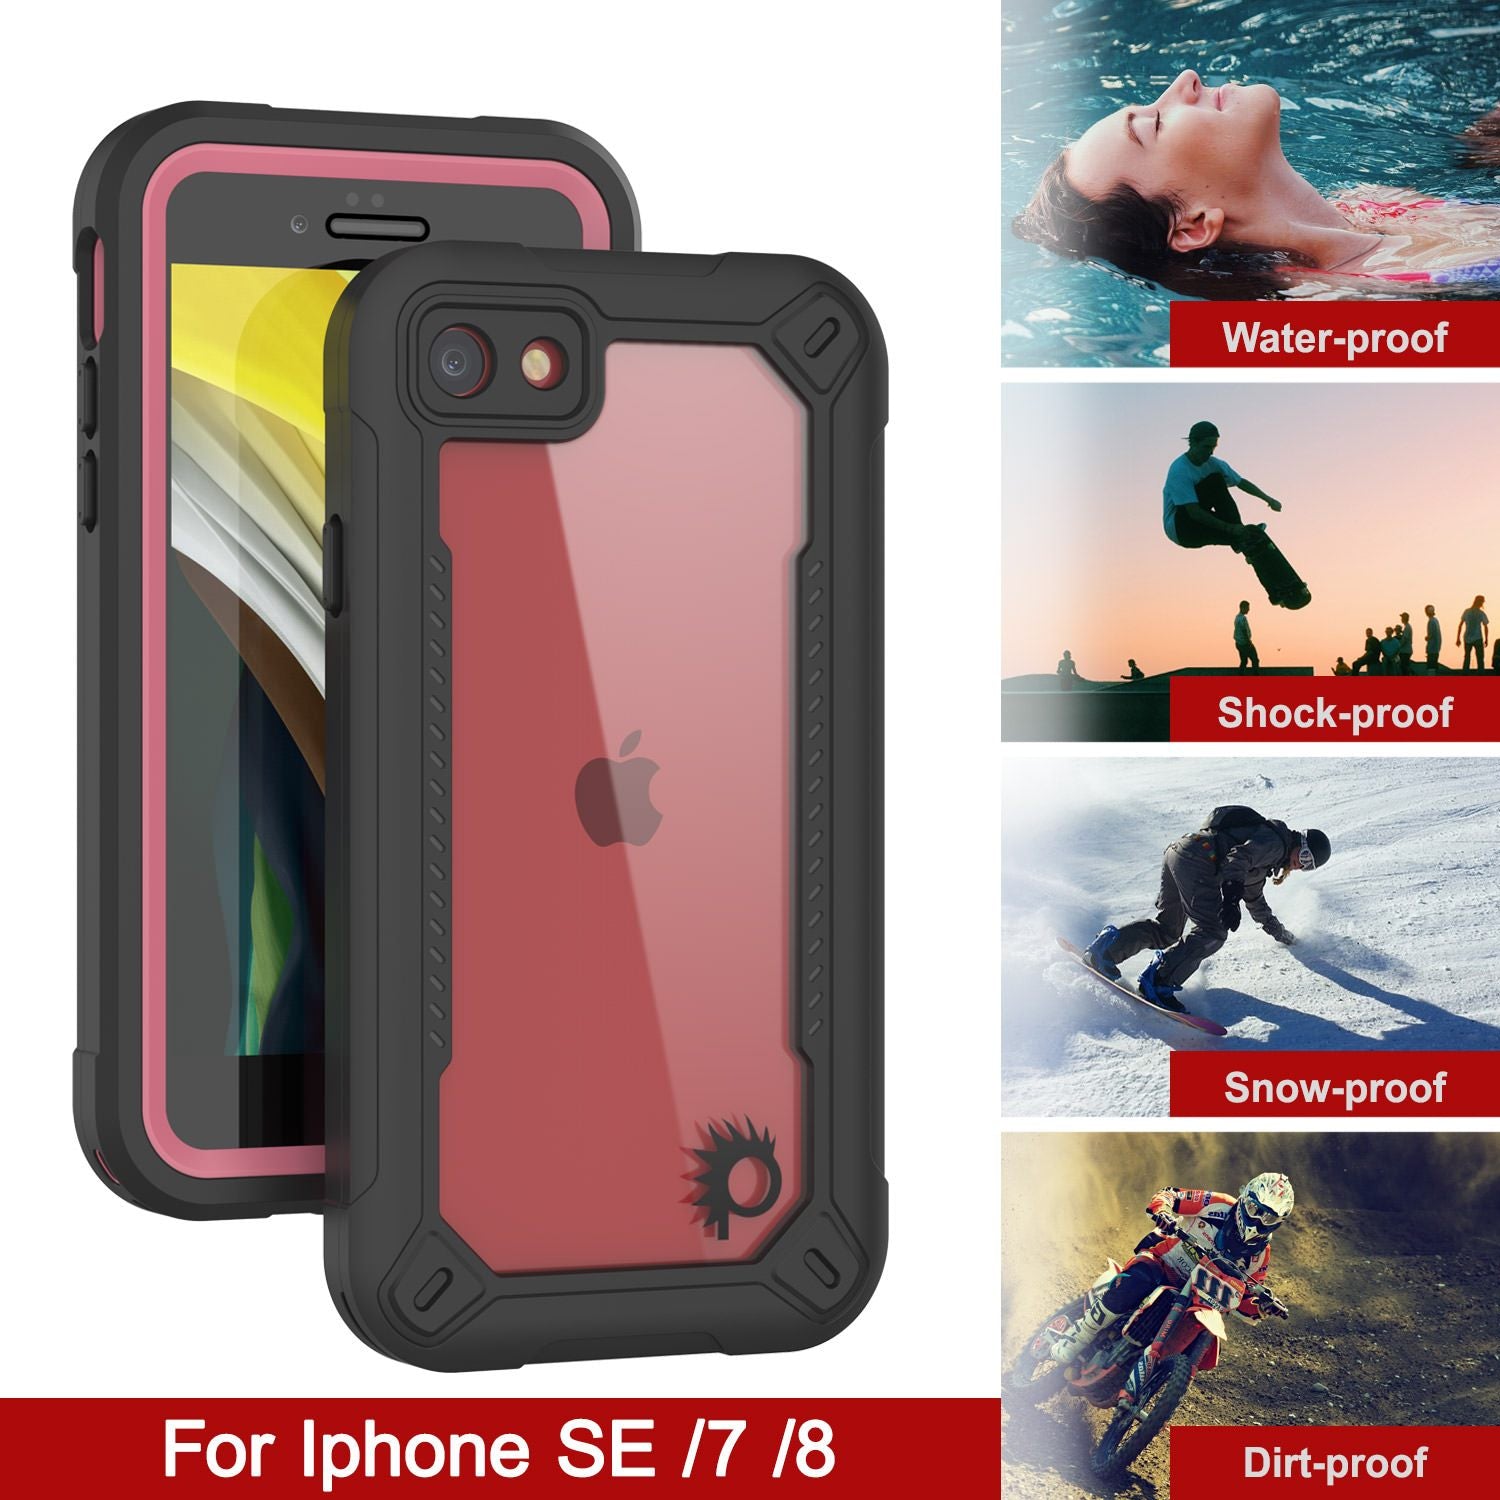 iPhone 7 Waterproof IP68 Case, Punkcase [pink]  [Maximus Series] [Slim Fit] [IP68 Certified] [Shockresistant] Clear Armor Cover with Screen Protector | Ultimate Protection